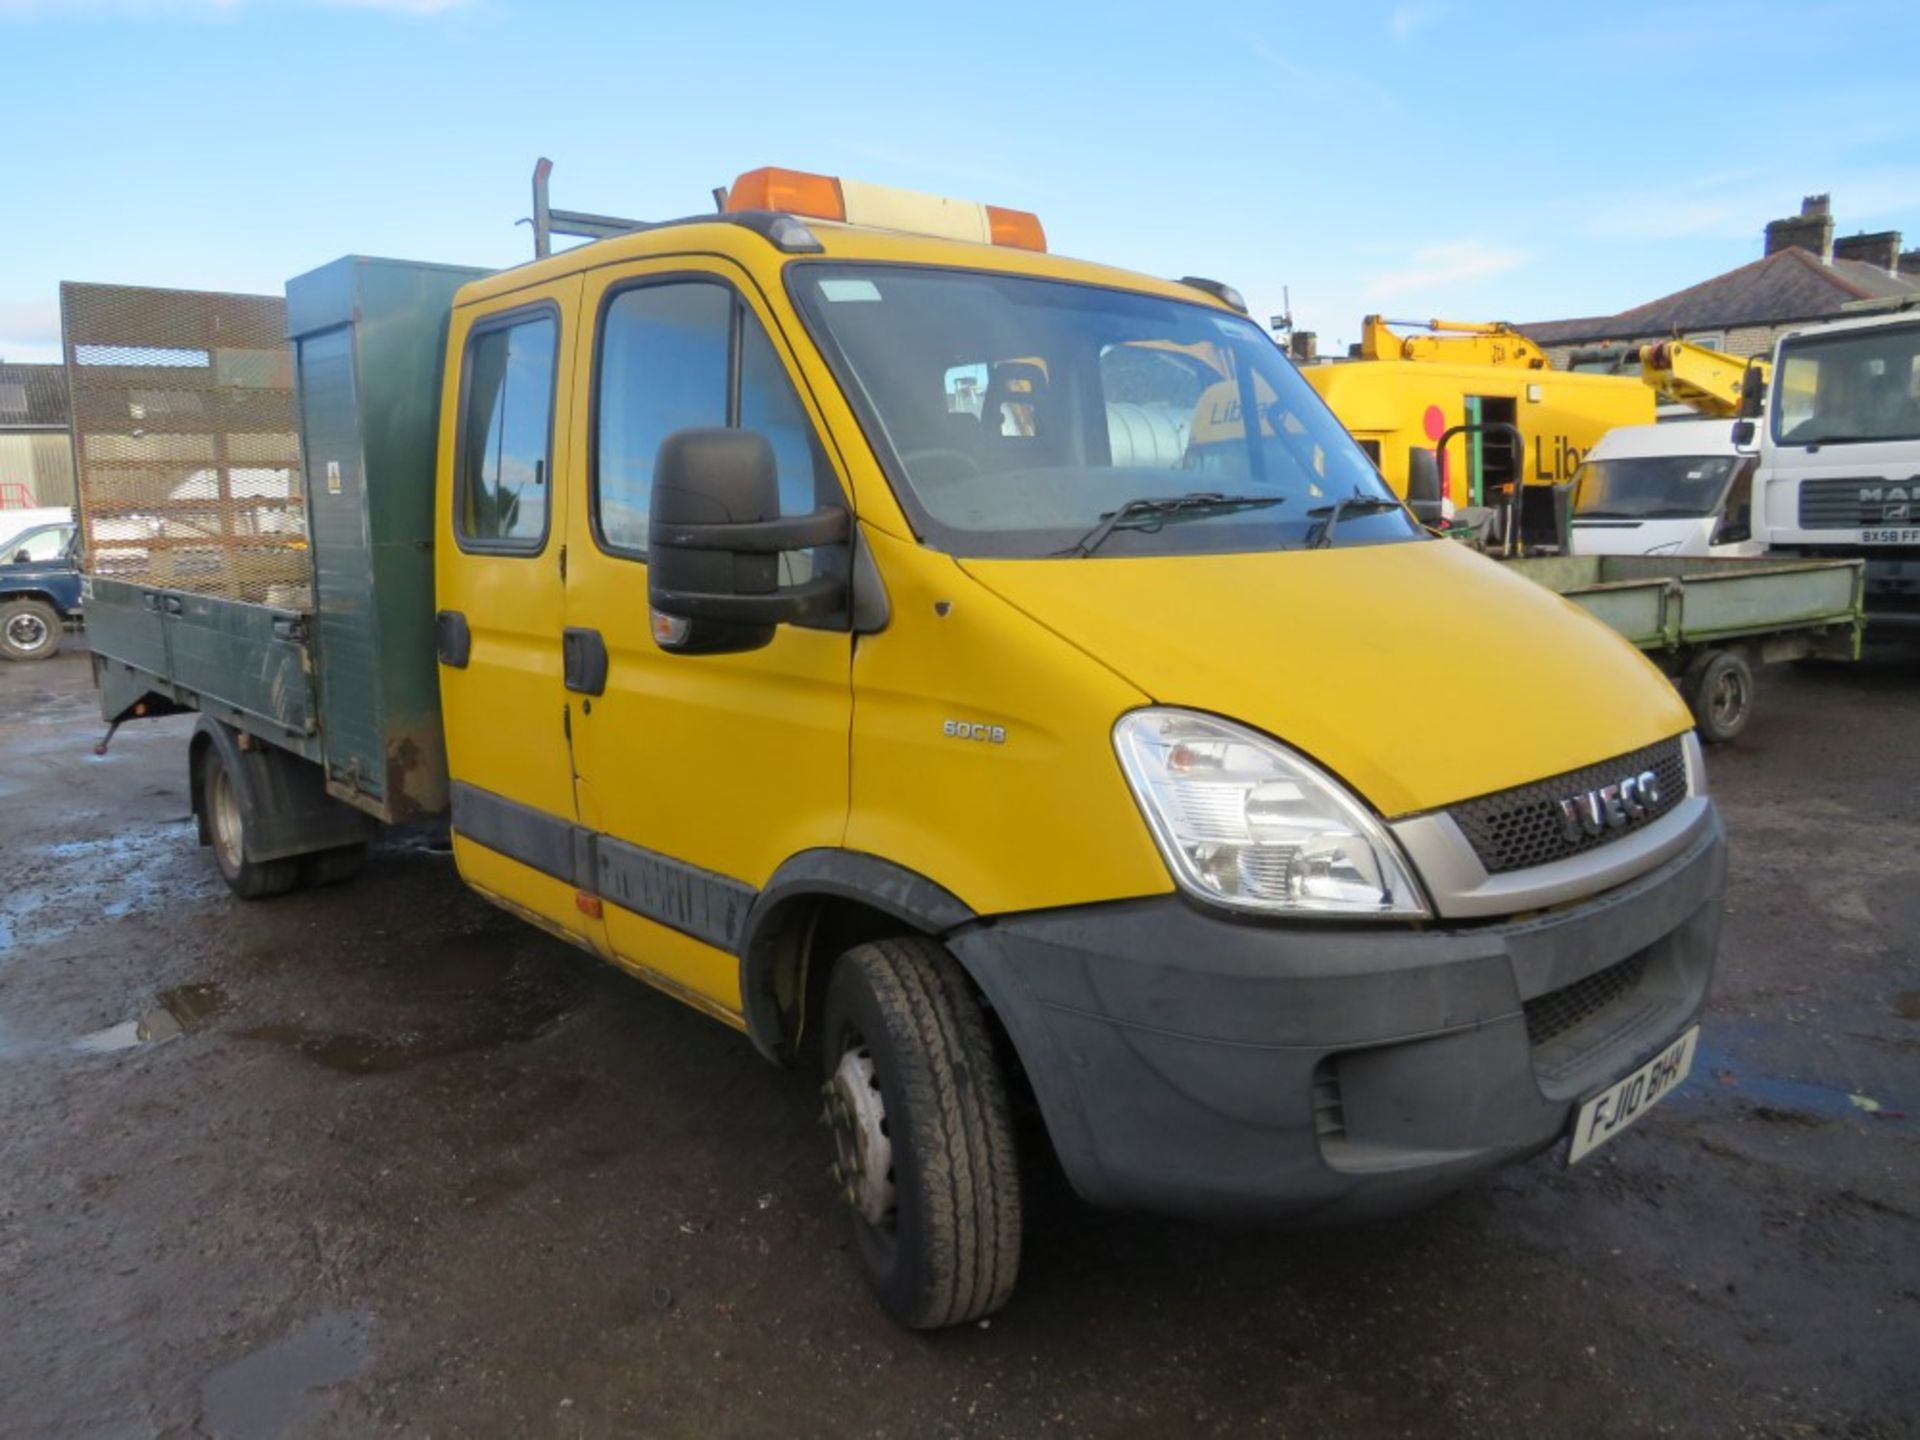 10 reg IVECO DAILY 60C18 BEAVERTAIL (DIRECT COUNCIL) 1ST REG 03/10, TEST 01/22, 70221M, V5 HERE, 1